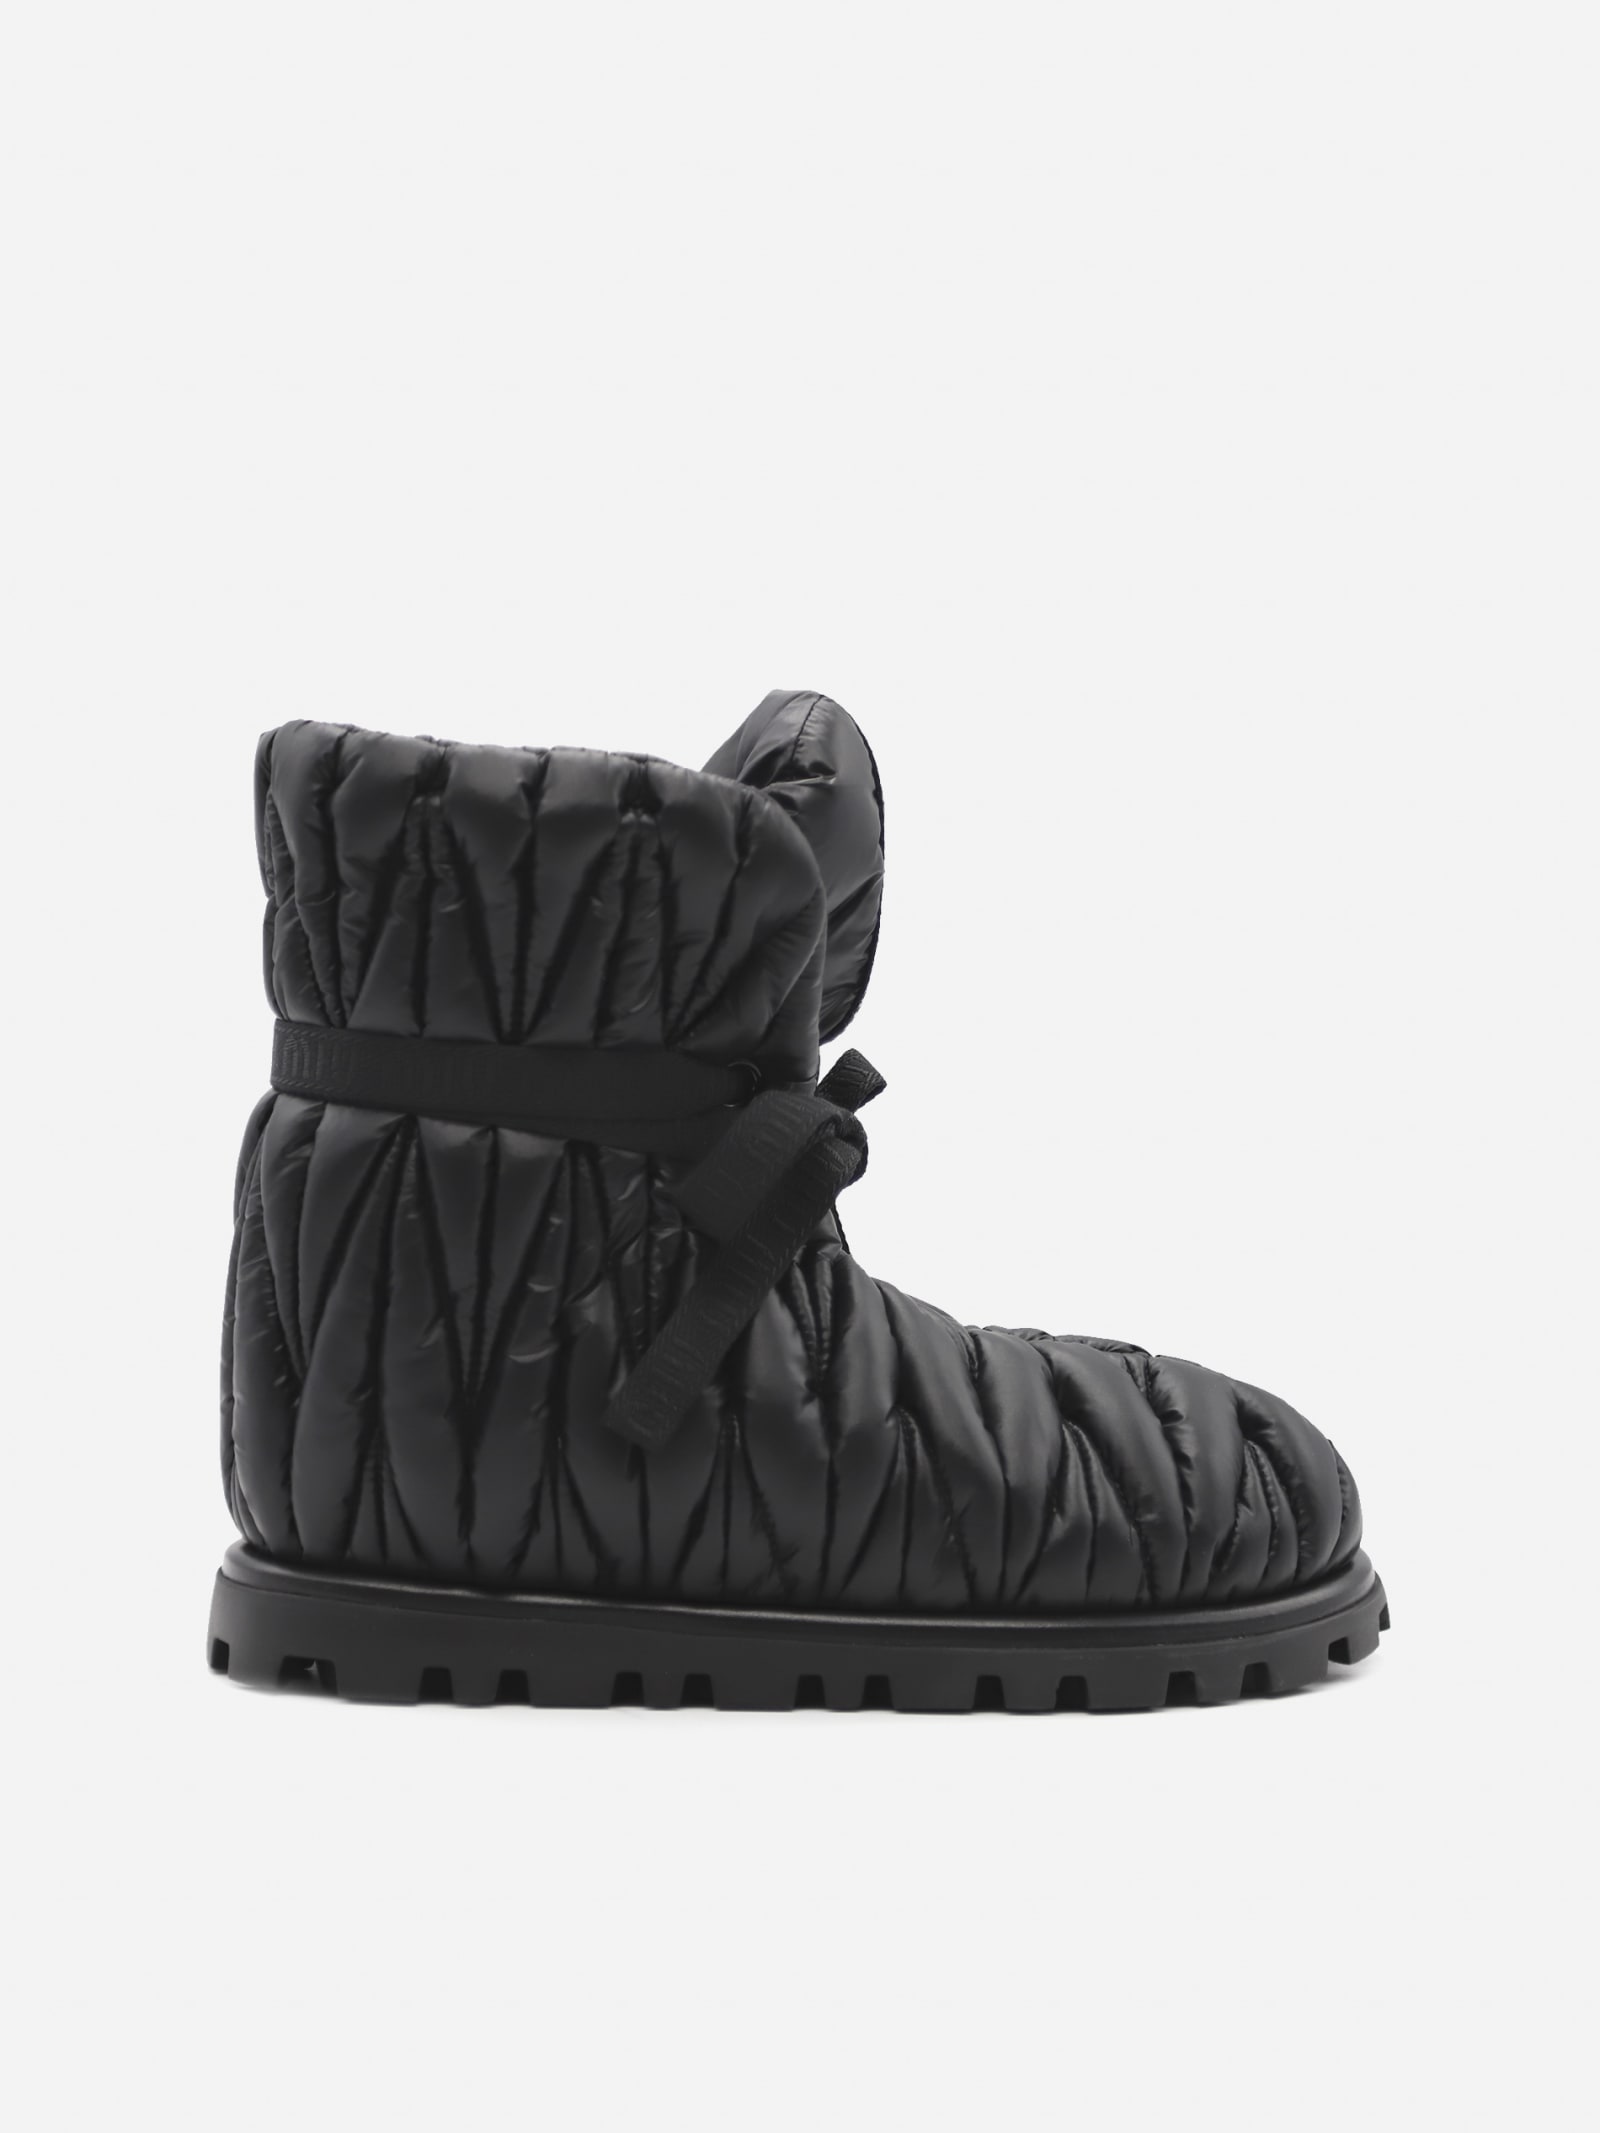 Miu Miu Quilted Nylon Ankle Boots